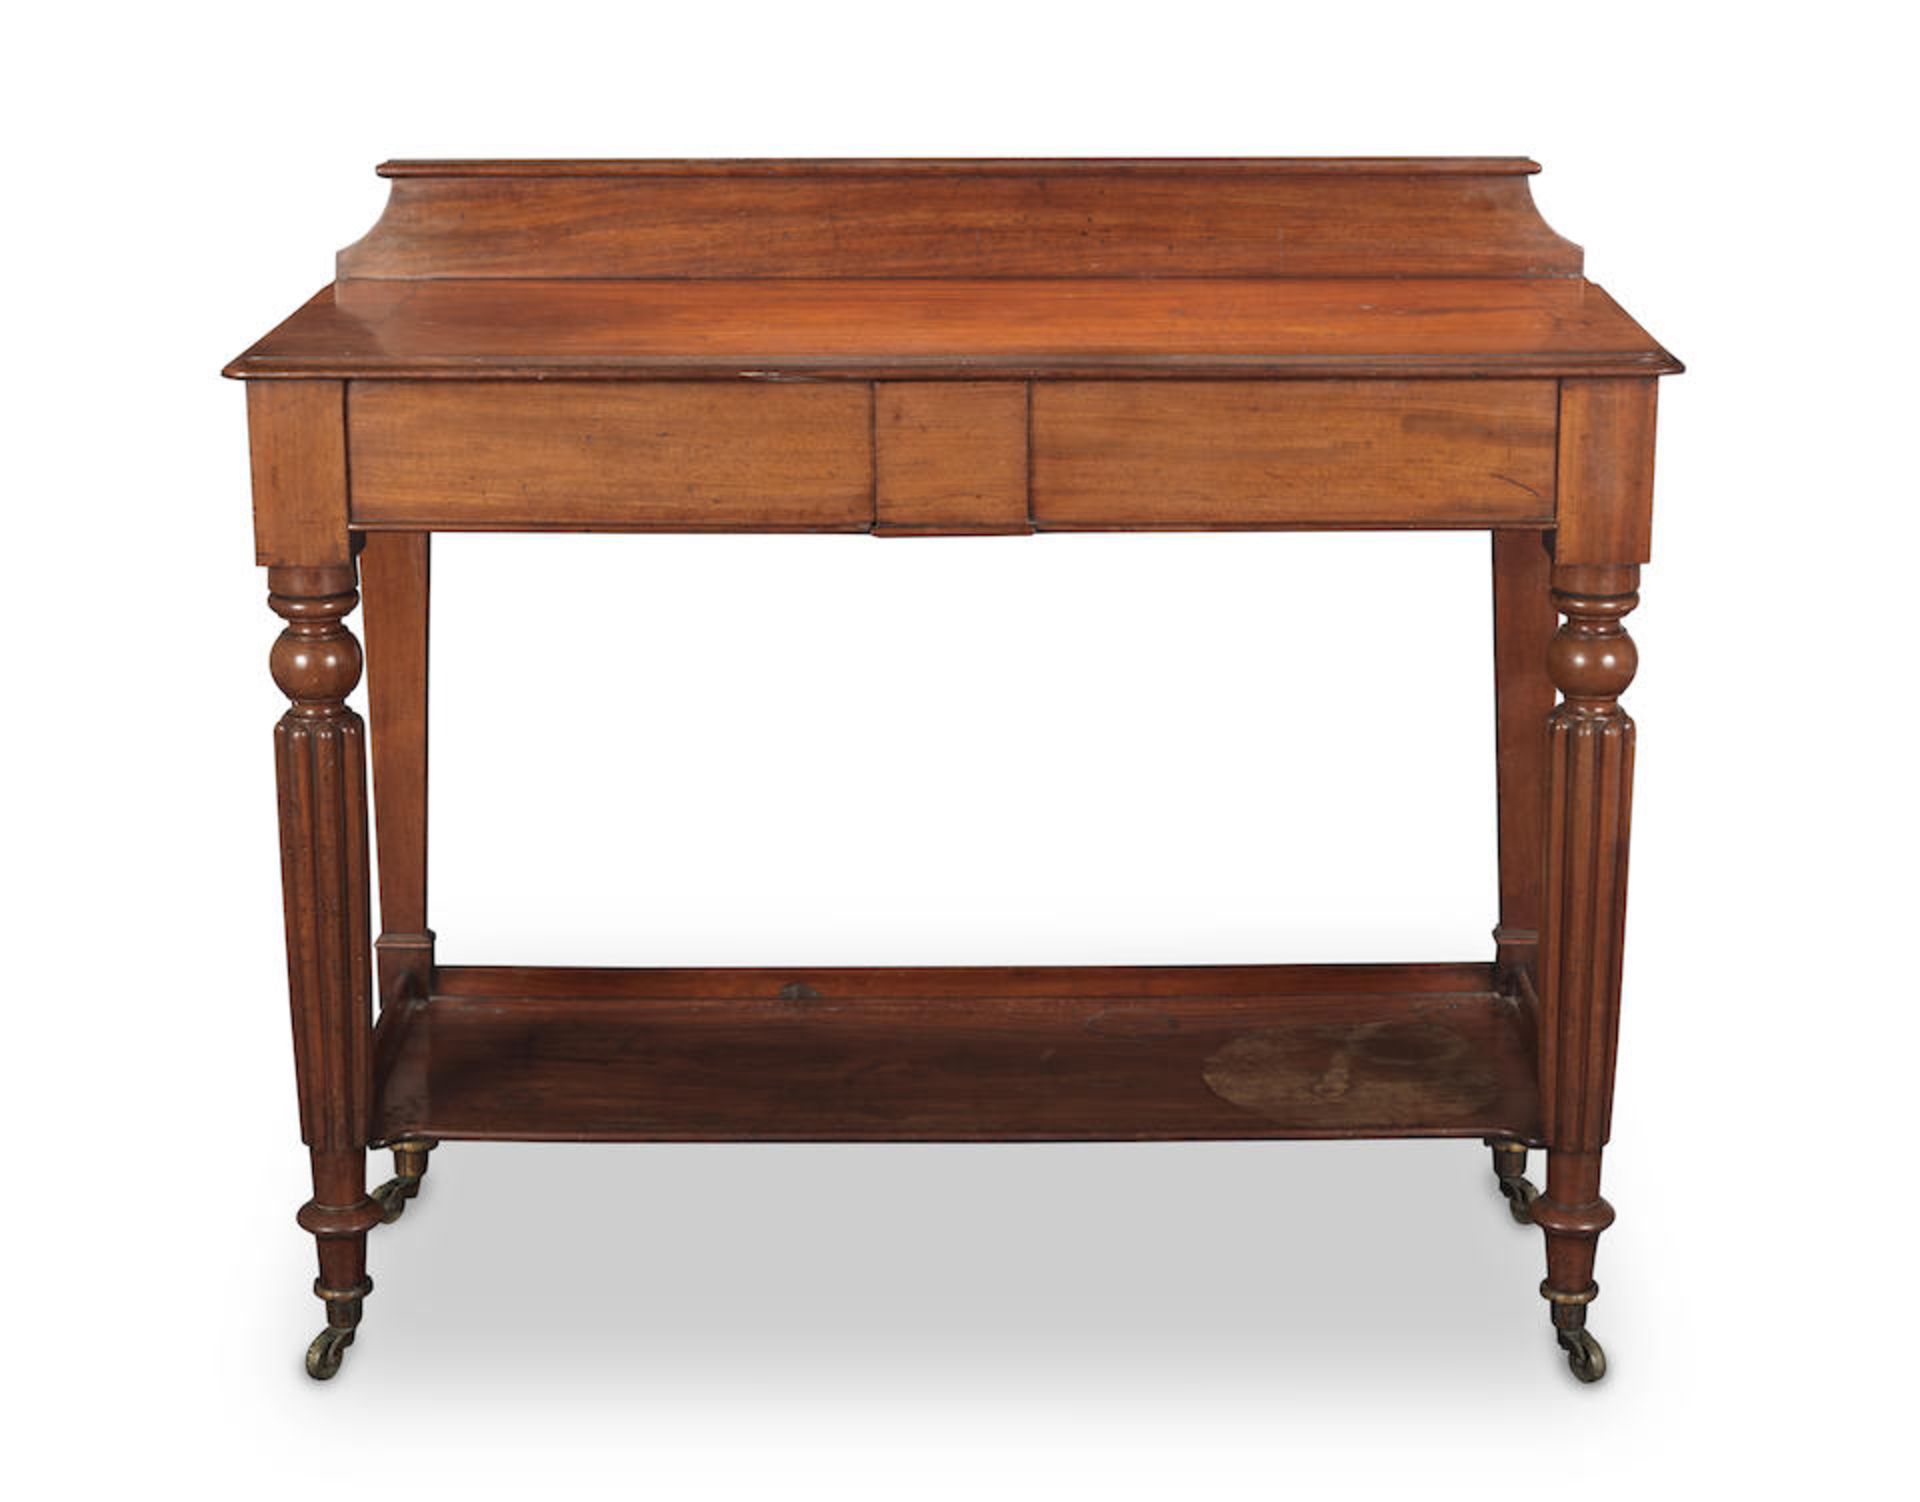 A William IV mahogany serving or side table Circa 1835